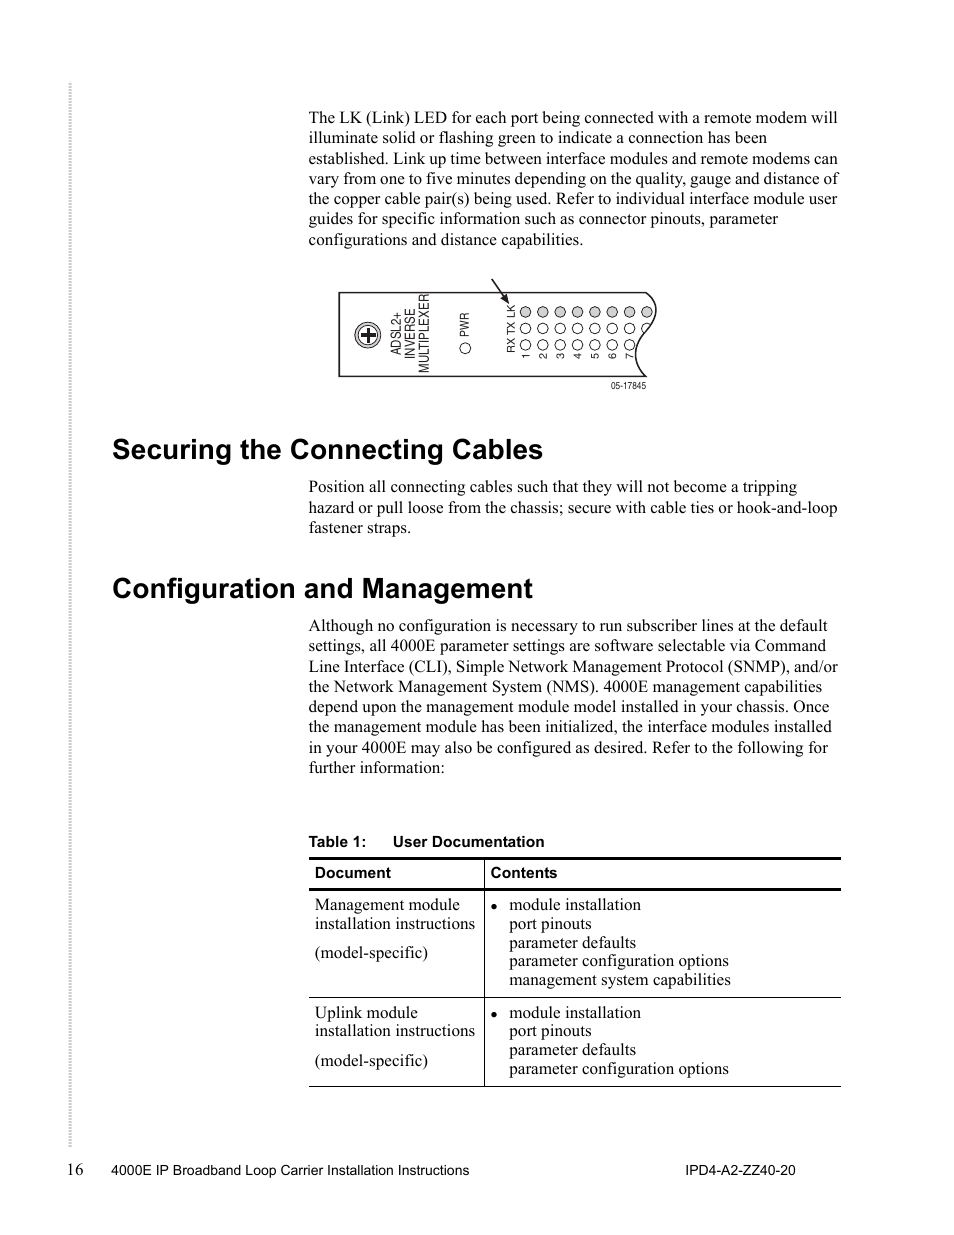 Securing the connecting cables, Configuration and management | Zhone Technologies 4000E User Manual | Page 16 / 22